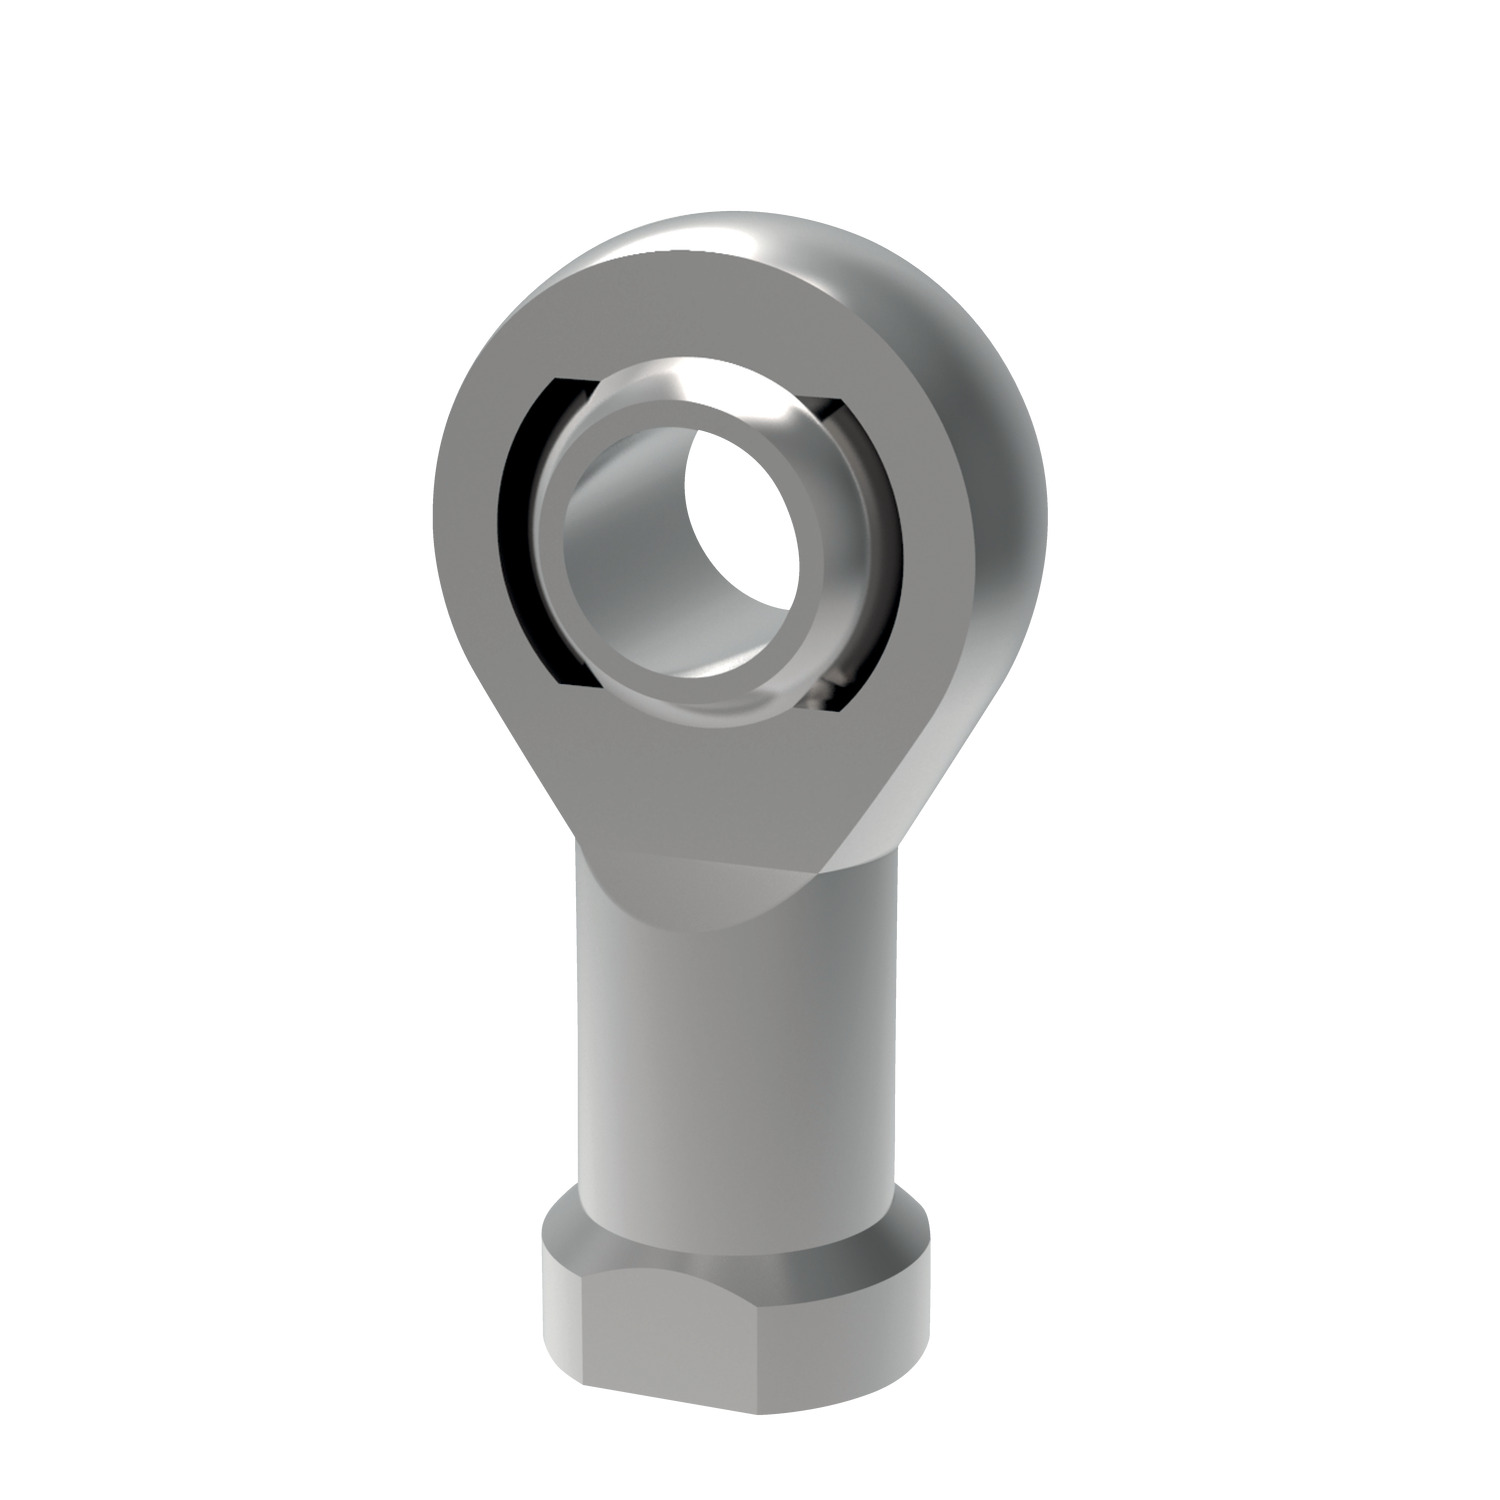 Stainless Heavy-Duty Rod Ends - Female Stainless steel heavy duty male rod end with plain spherical bearing.
 